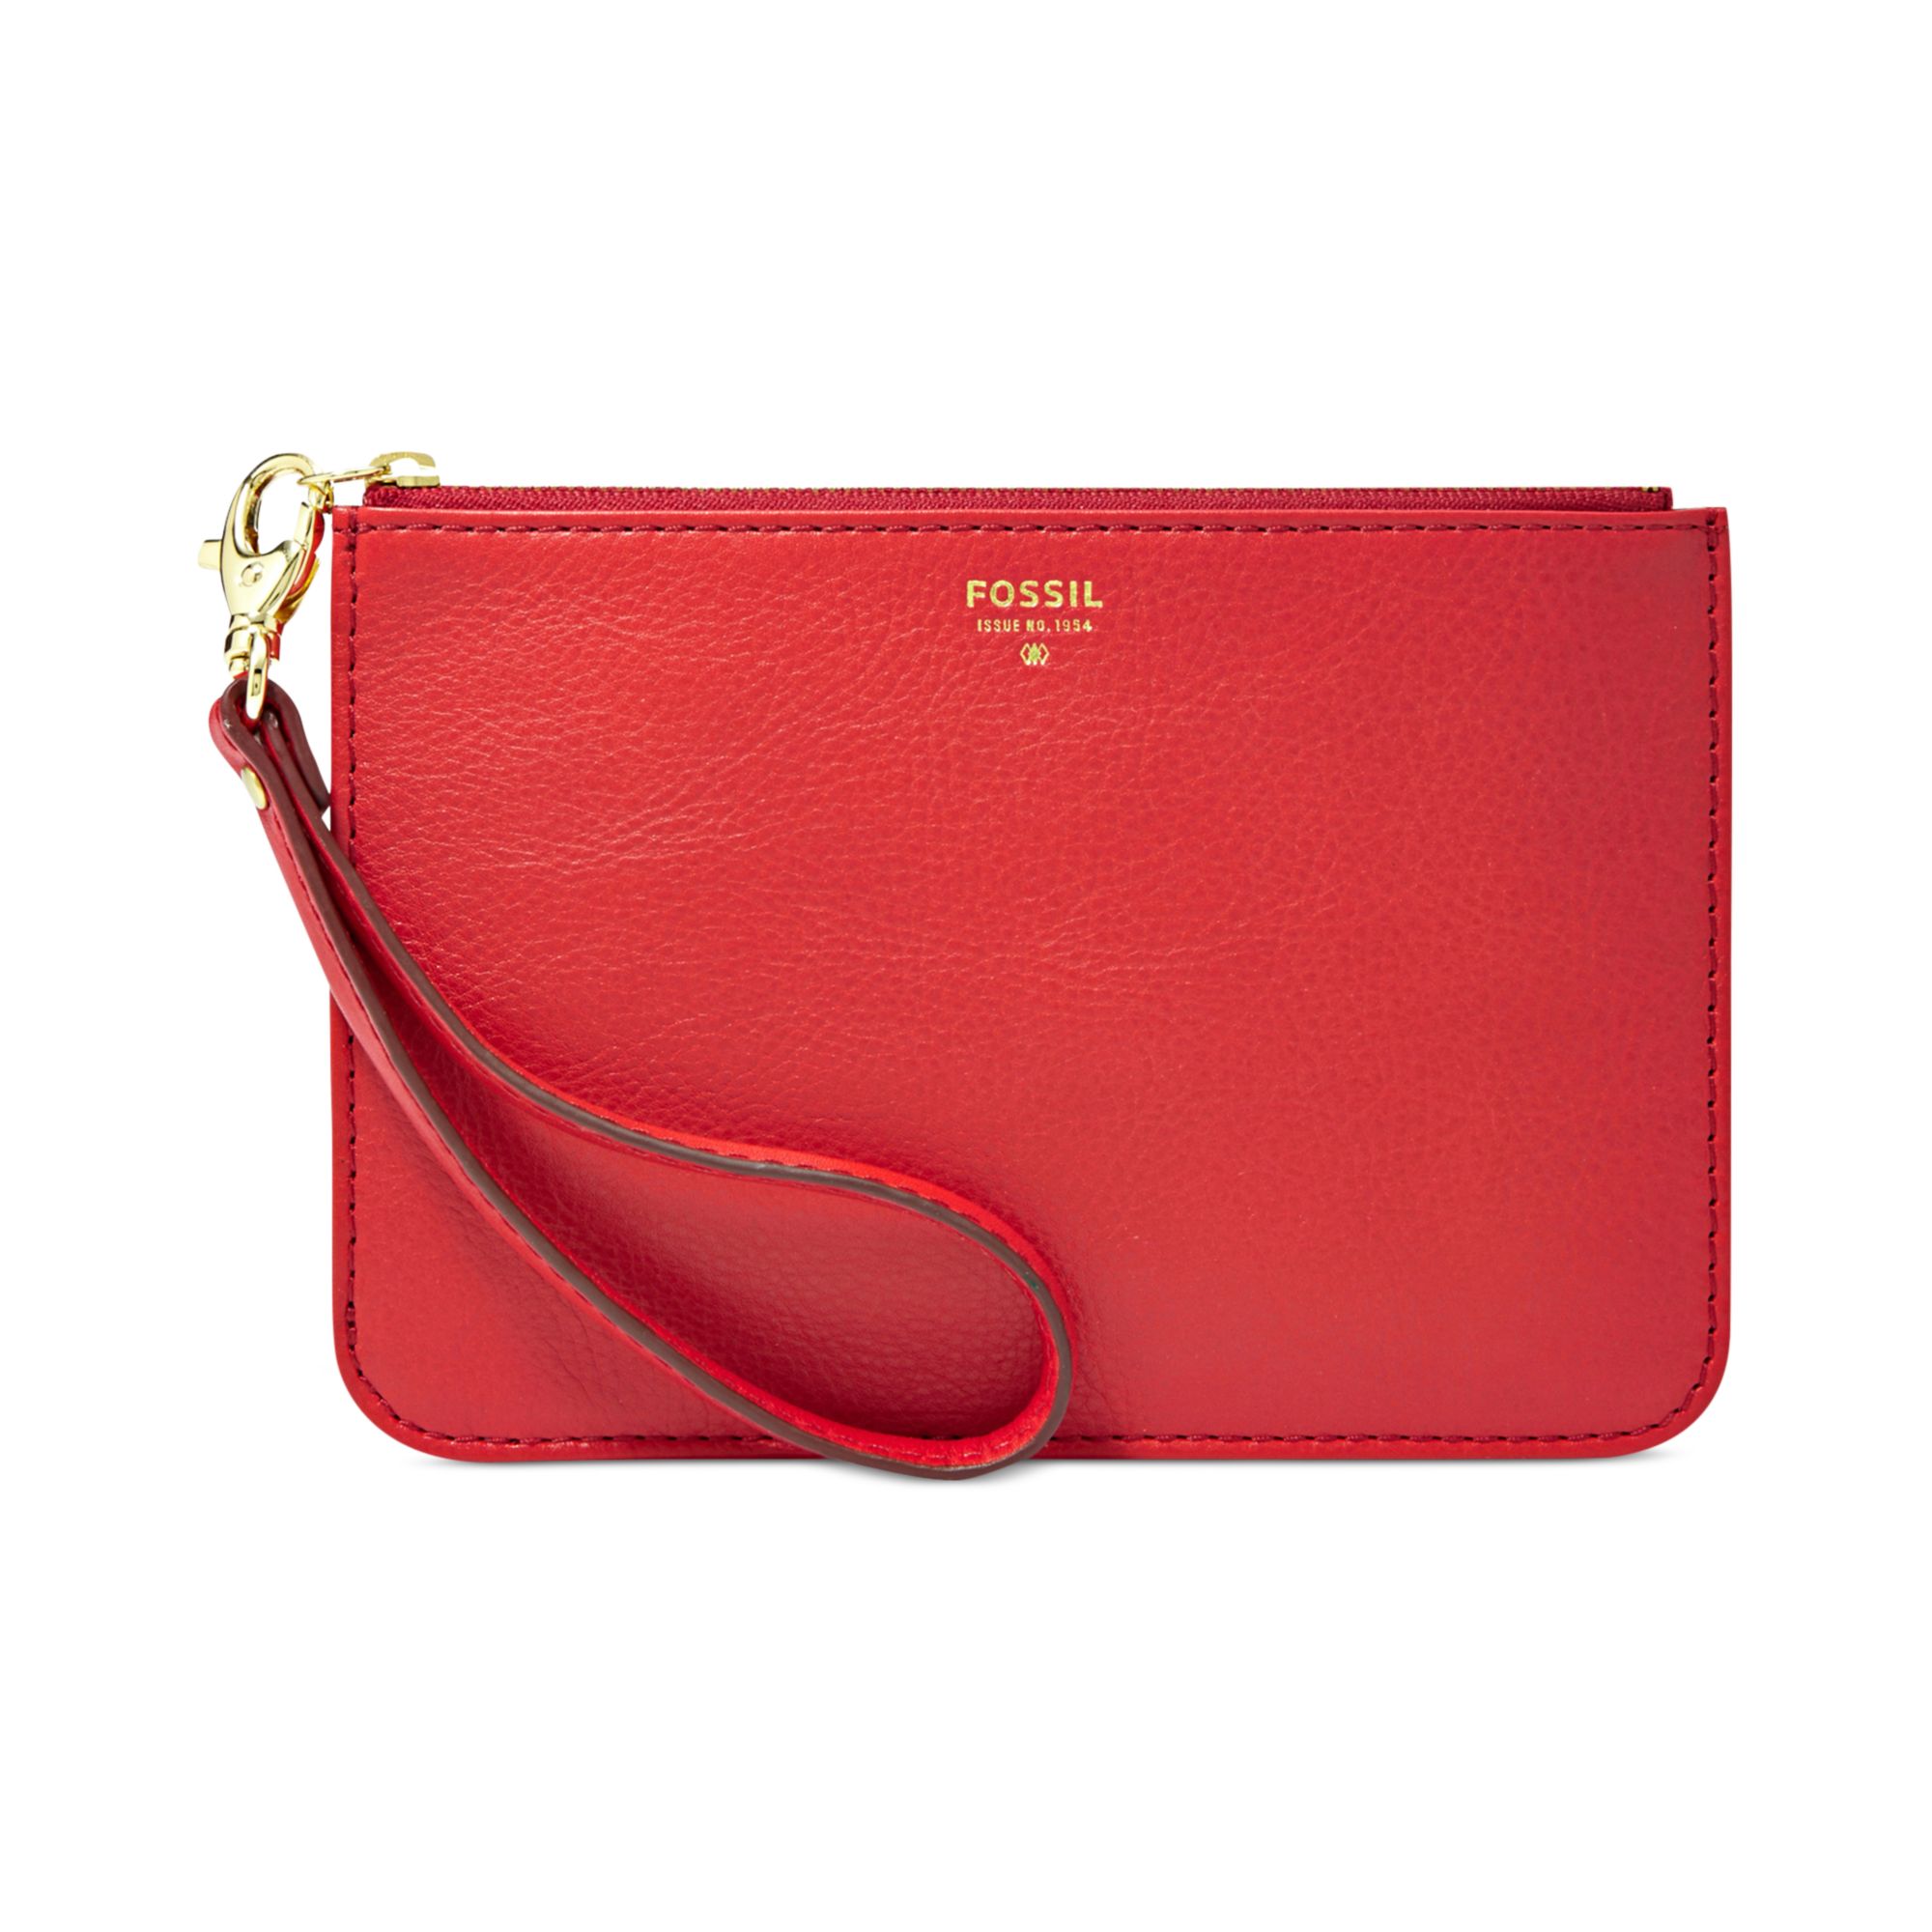 Lyst - Fossil Small Leather Zip Pouch in Red